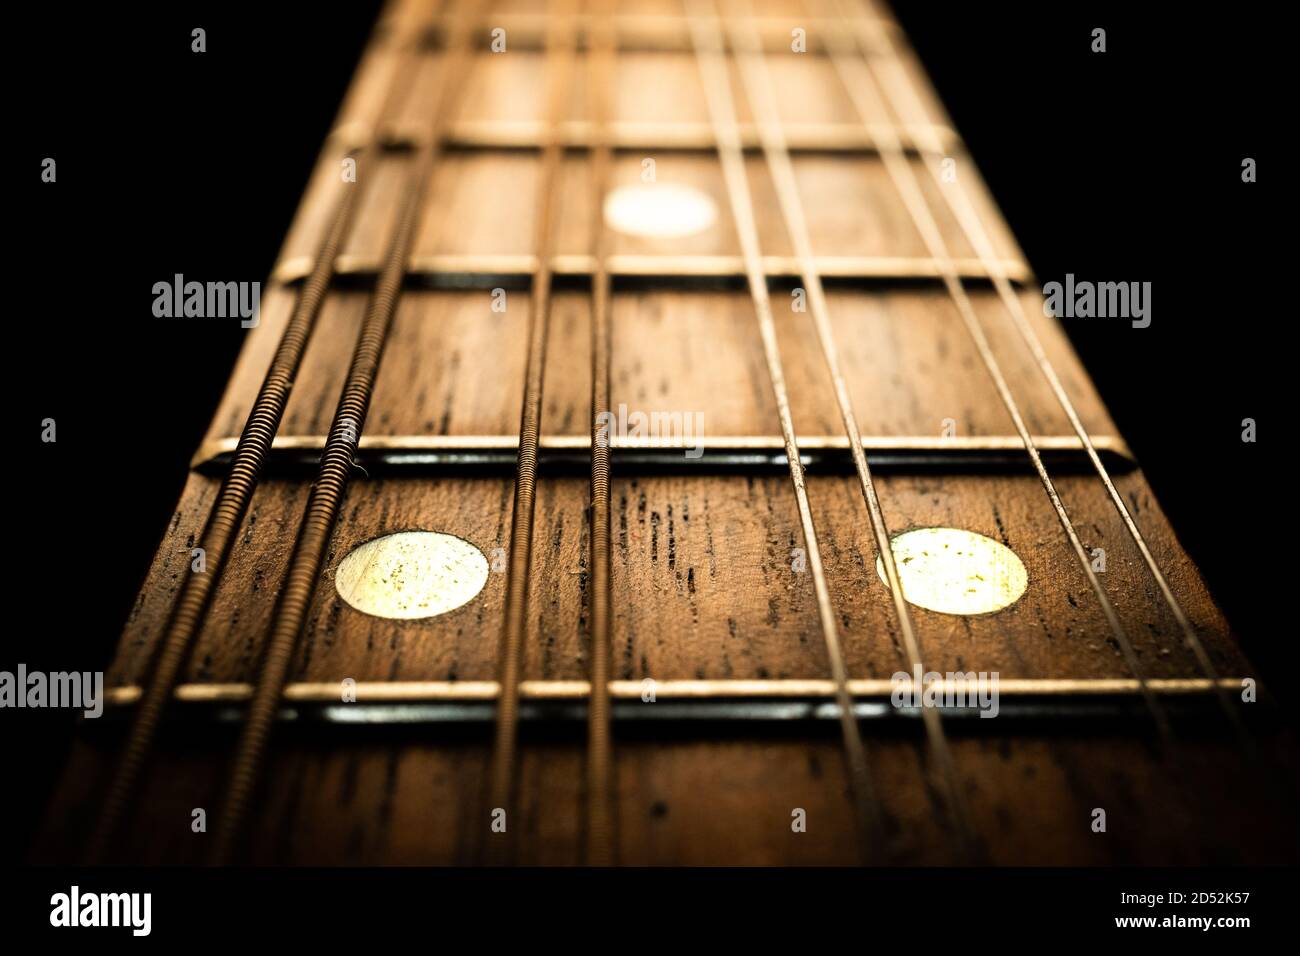 Macro photo of mandolin fretboard at the 12th fret with silver inlays Stock Photo